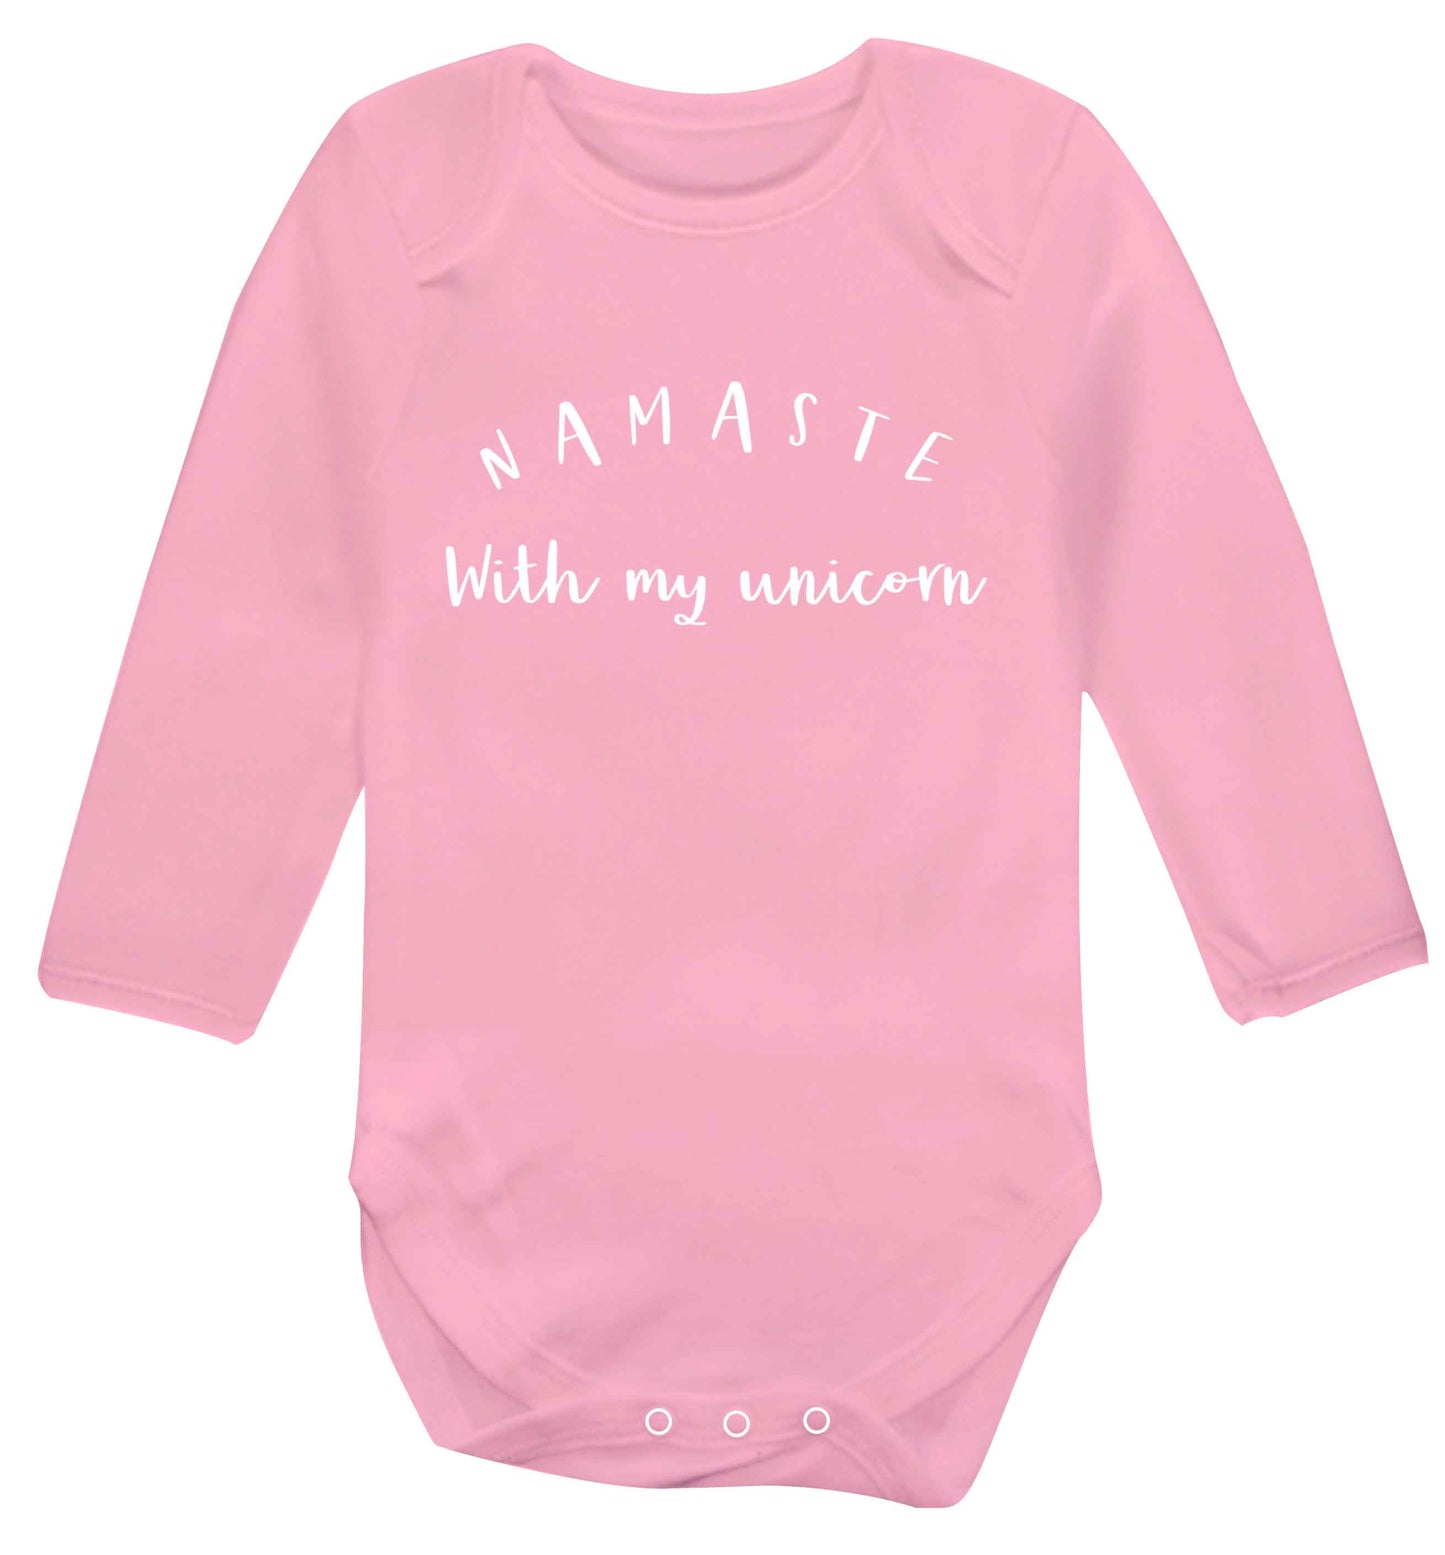 Namaste with my unicorn Baby Vest long sleeved pale pink 6-12 months